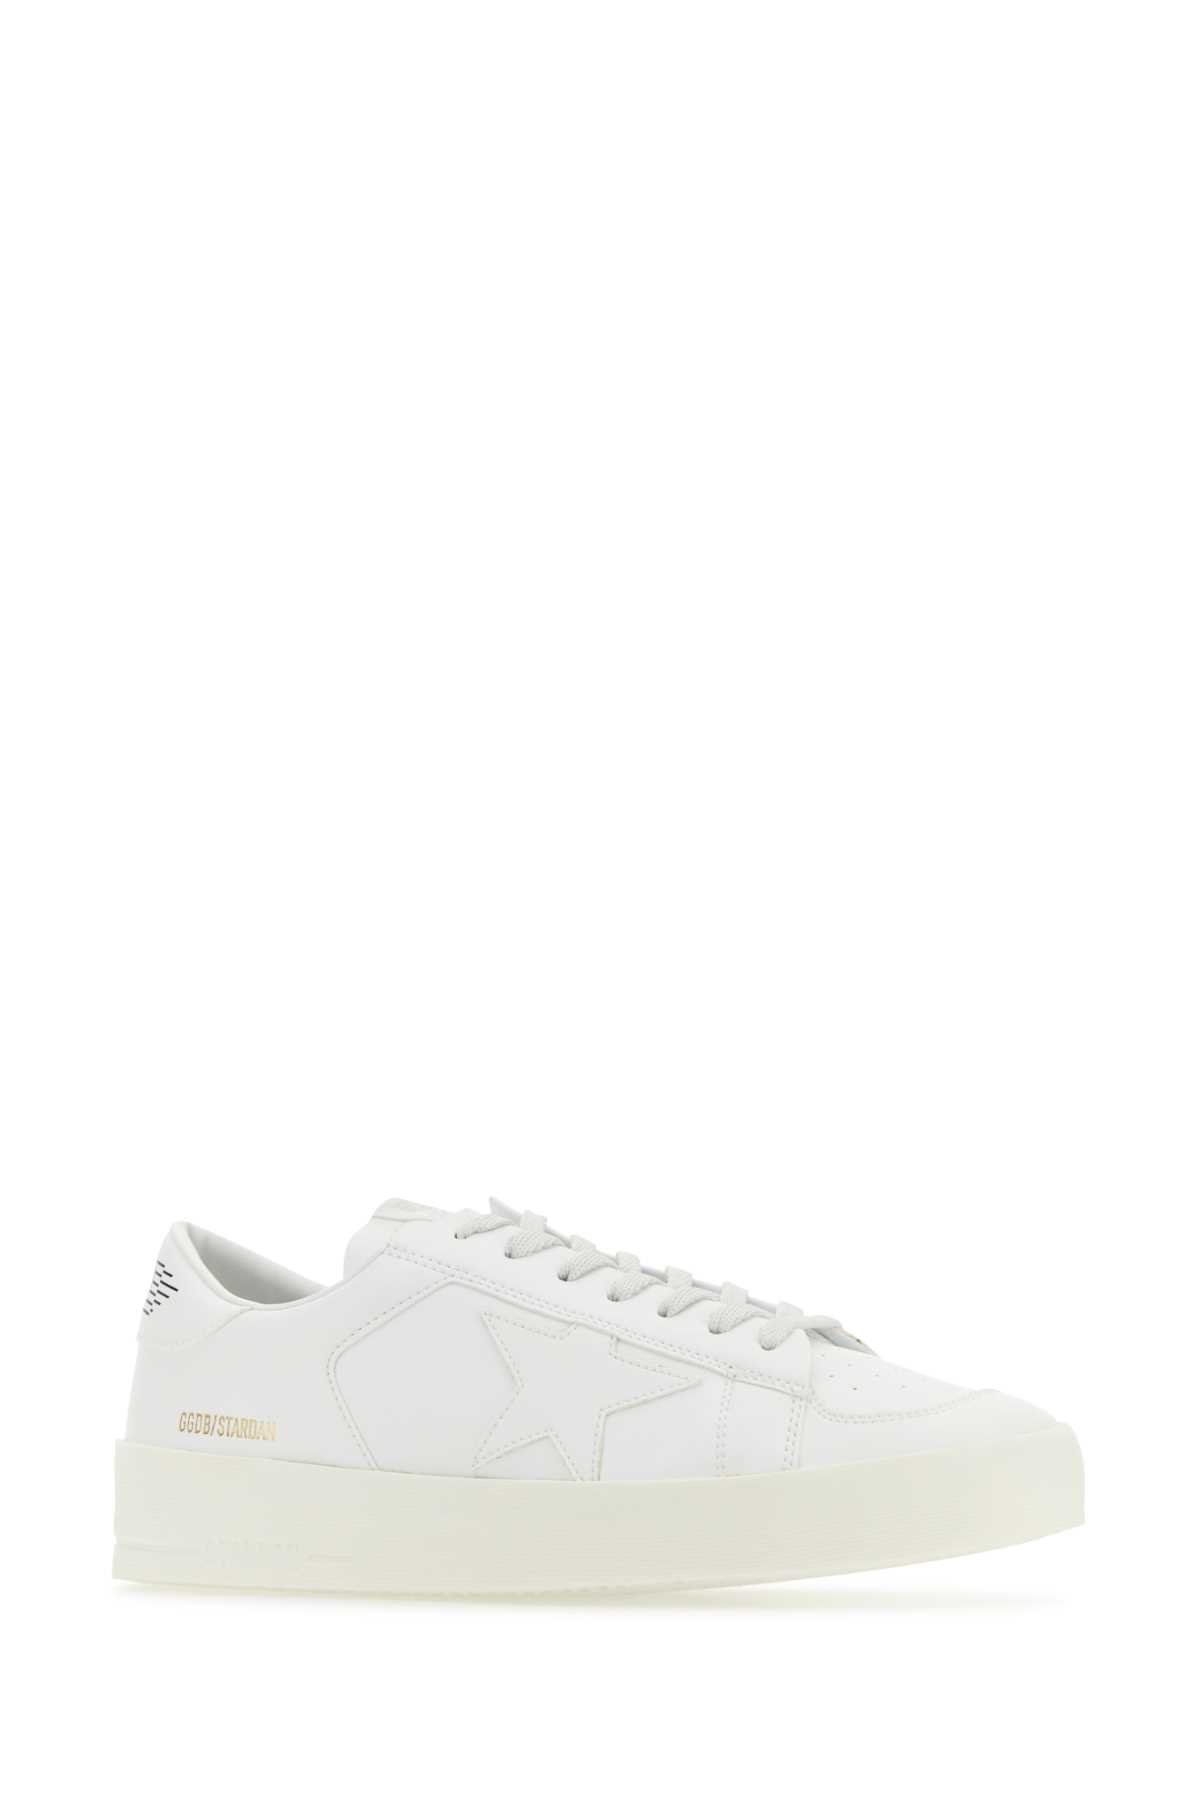 GOLDEN GOOSE WHITE SYNTHETIC LEATHER STARDAN SNEAKERS